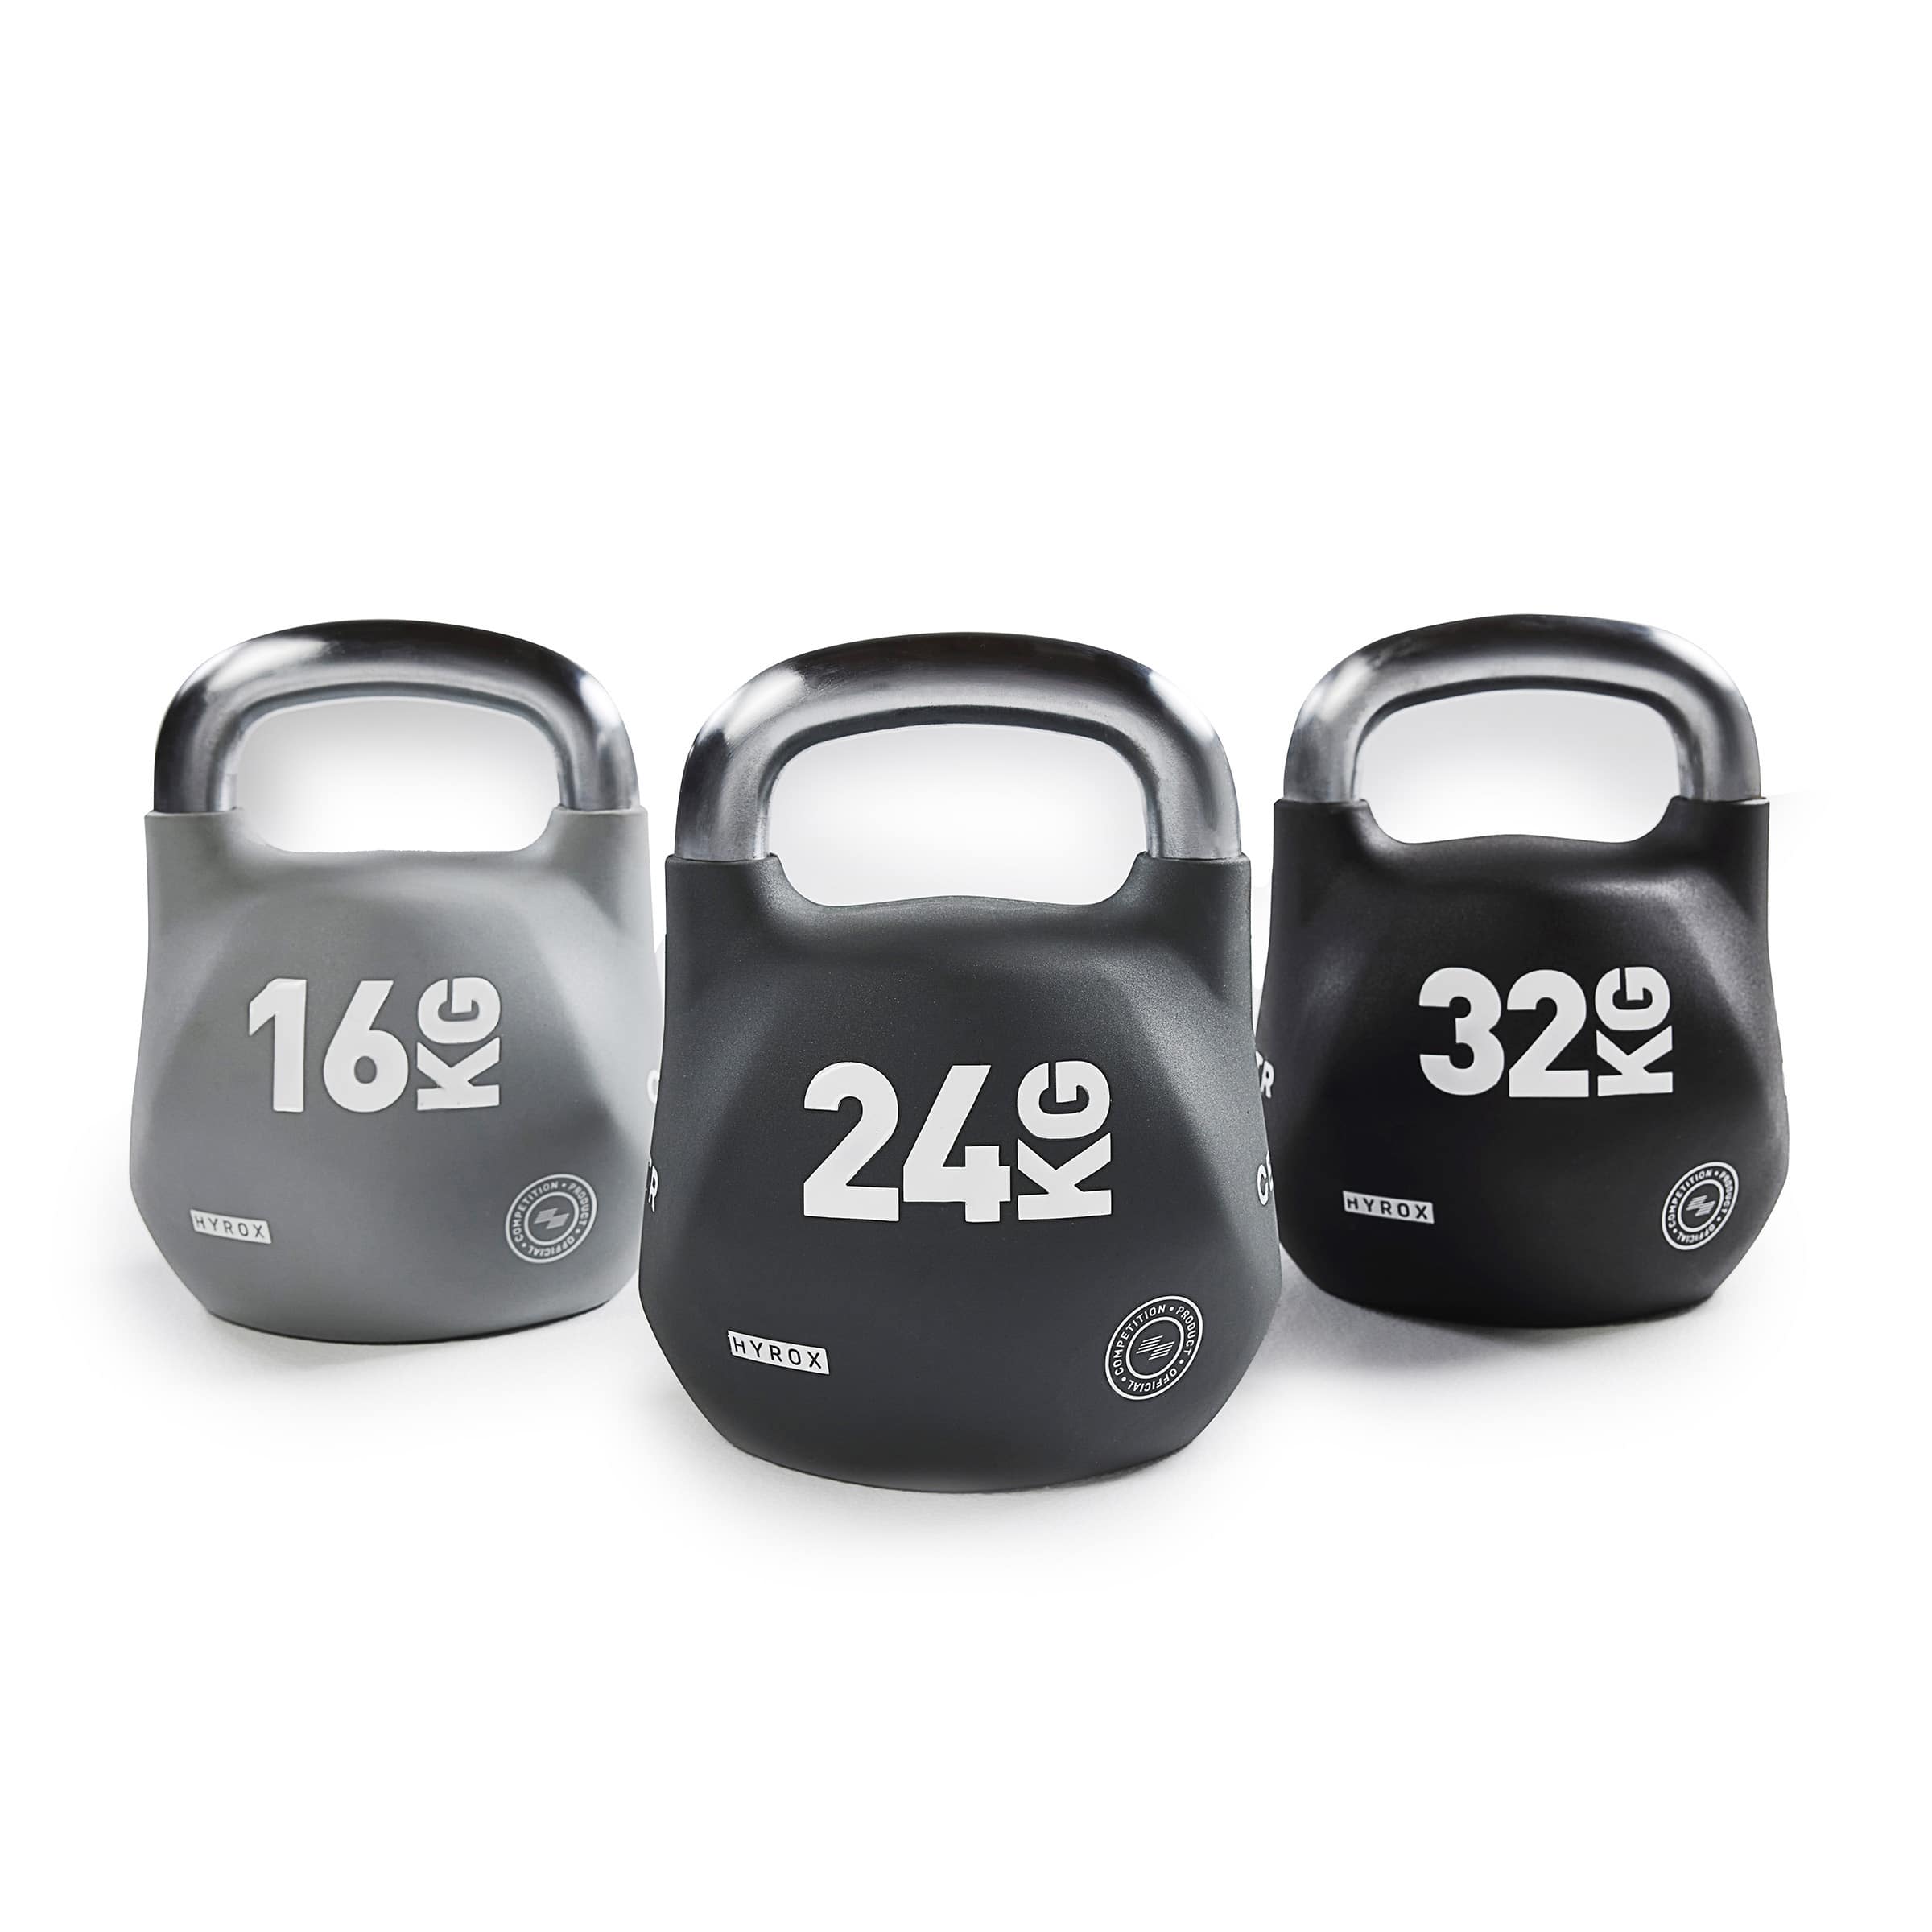 CENTR x HYROX Competition Octo Kettlebells (SHIPPING EARLY MAY)